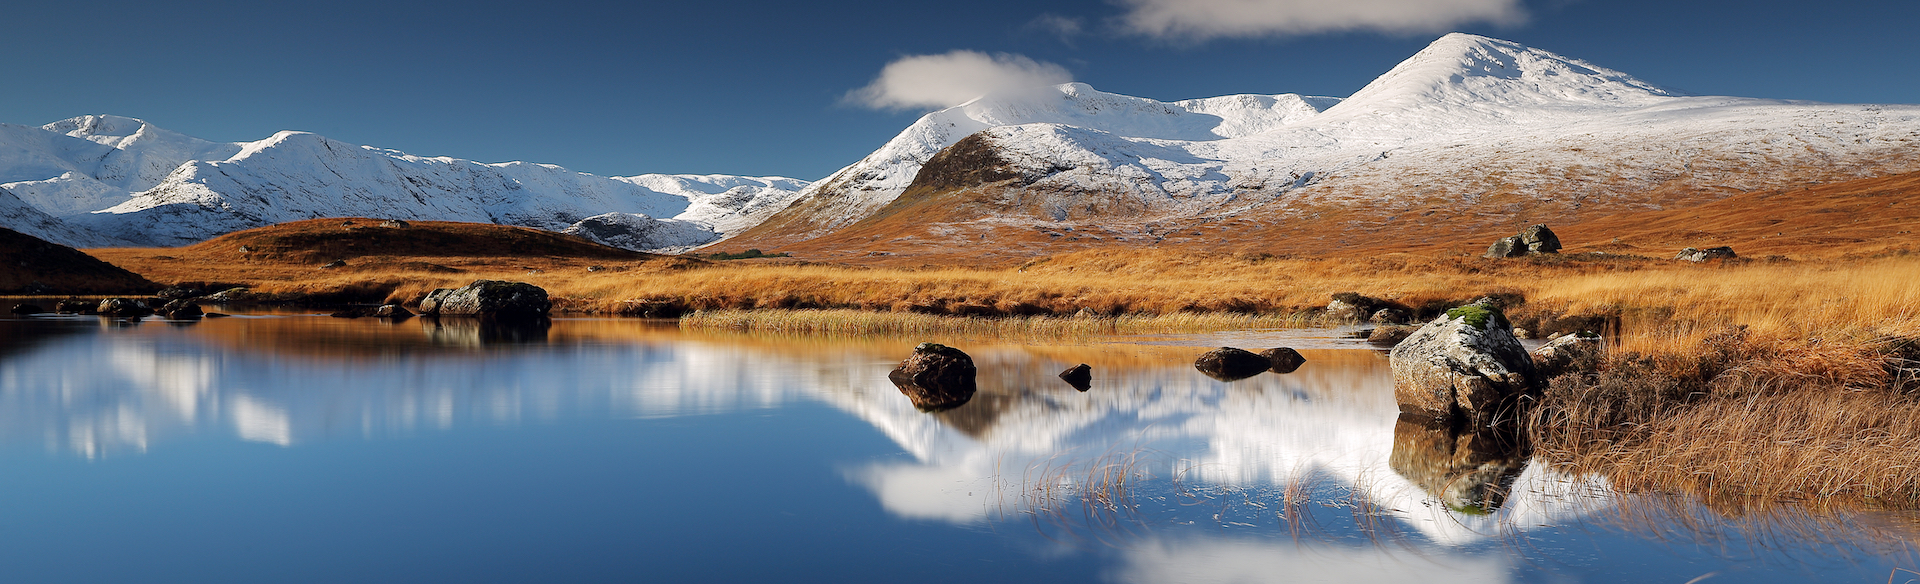 Snow peaked mountains reflected in the still water of a Scottish loch